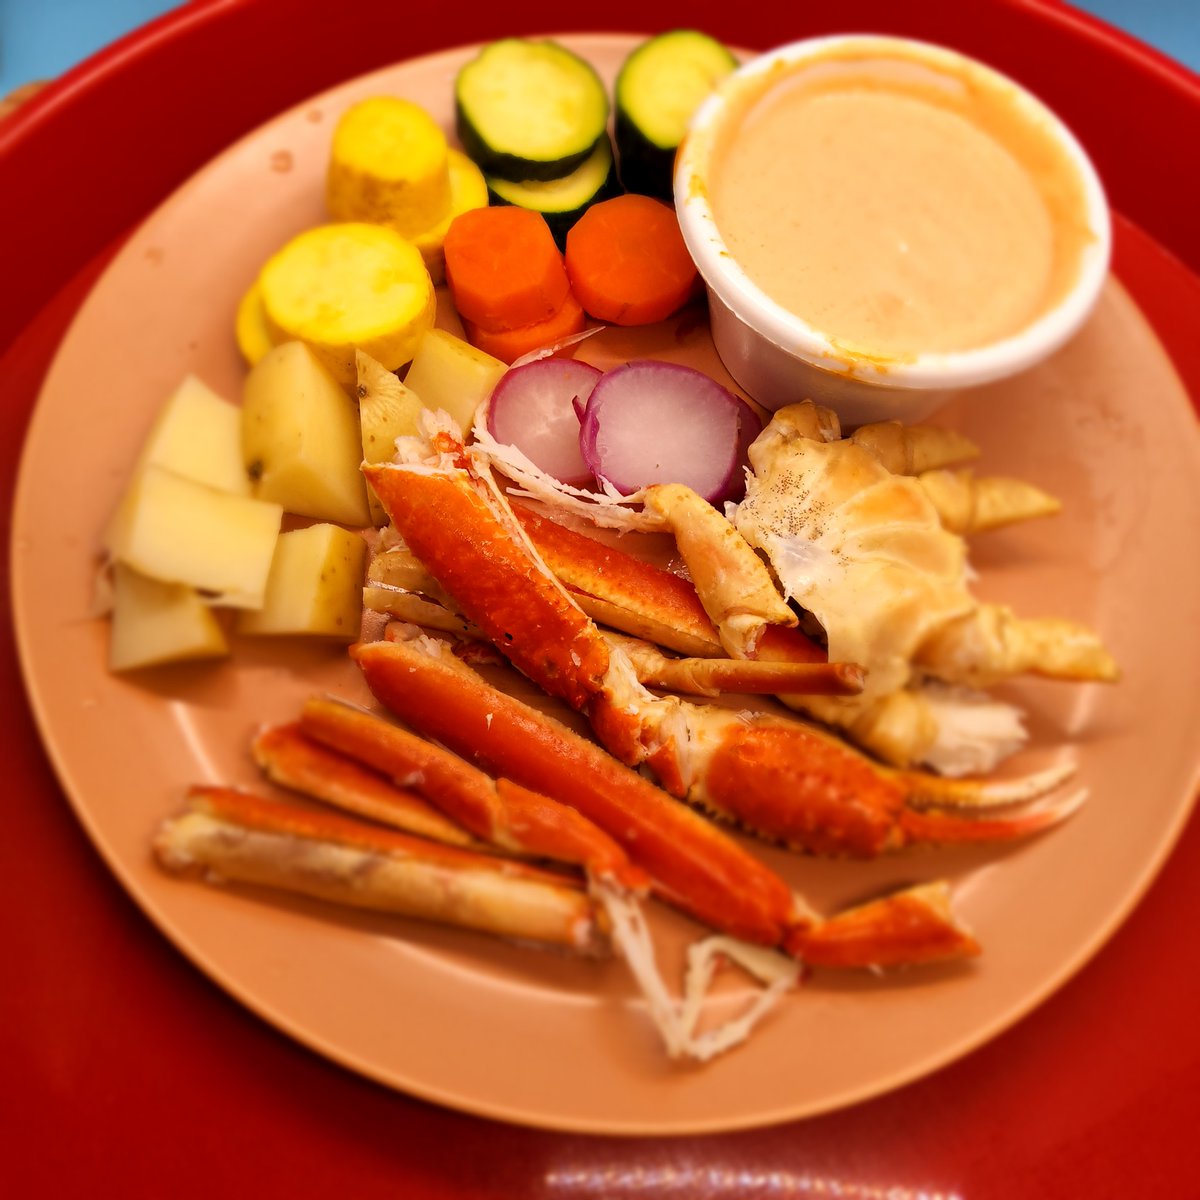 Snow Crab
Steamed vegetables & remoulade sauce
#YummyliciousChef🐻 #cooking #FoodPhotography #homecooking